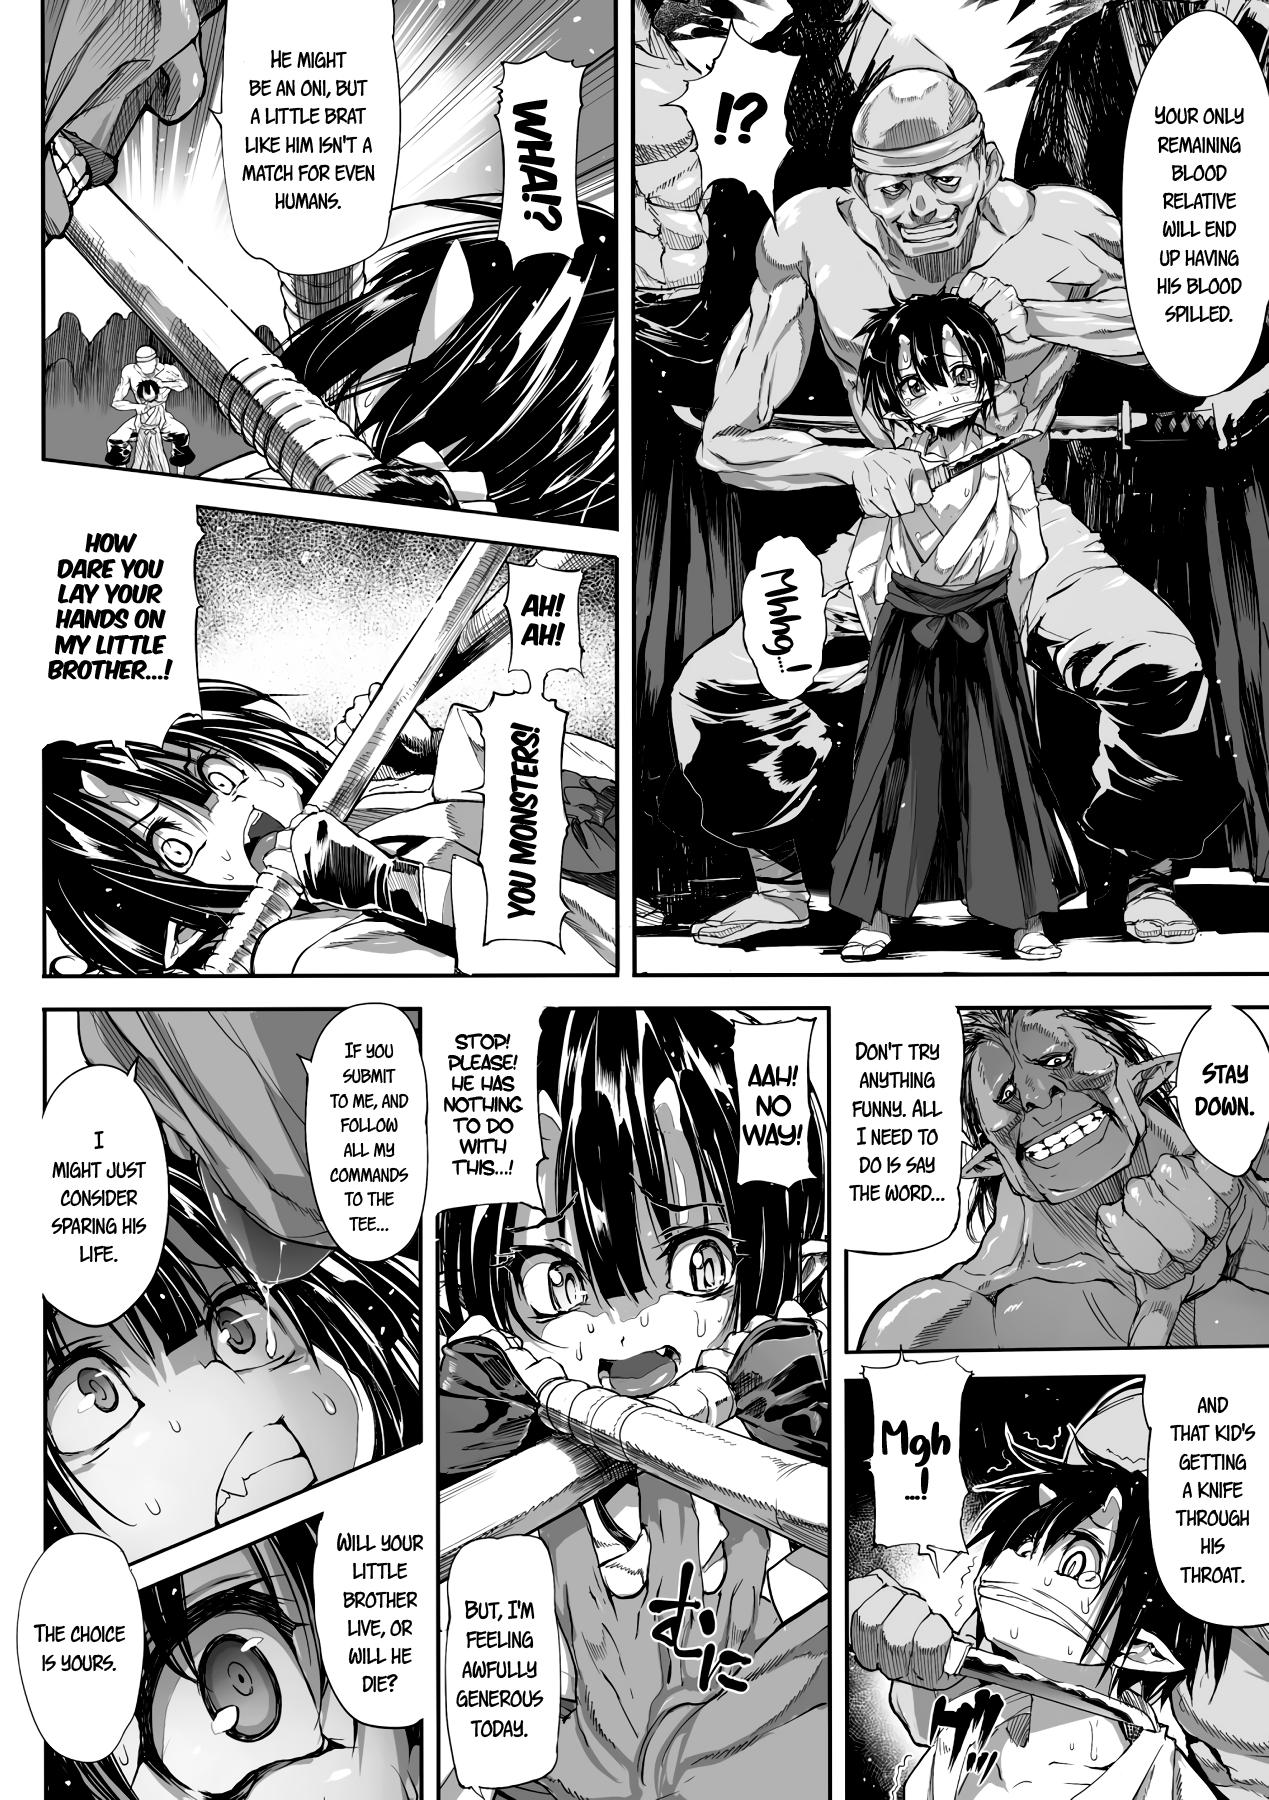 Banging Onibana Muzan | Withering Oni Flowers Ch. 1-6 Lovers - Page 8